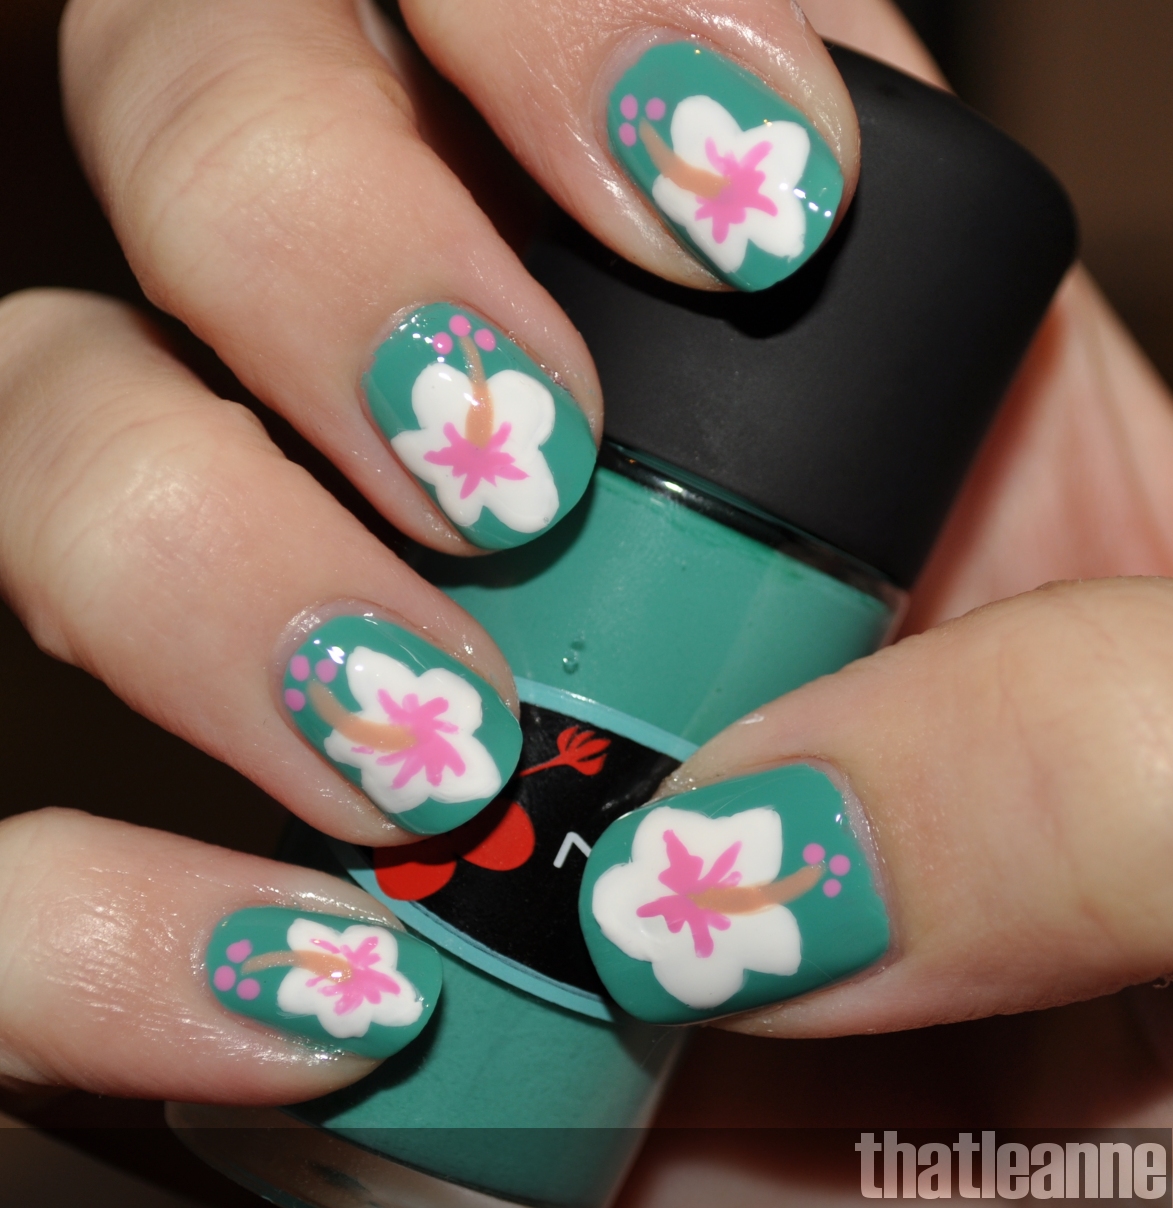 thatleanne: MAC Surf Baby Nail Polish Swatches, Hibiscus Nail Art and ...